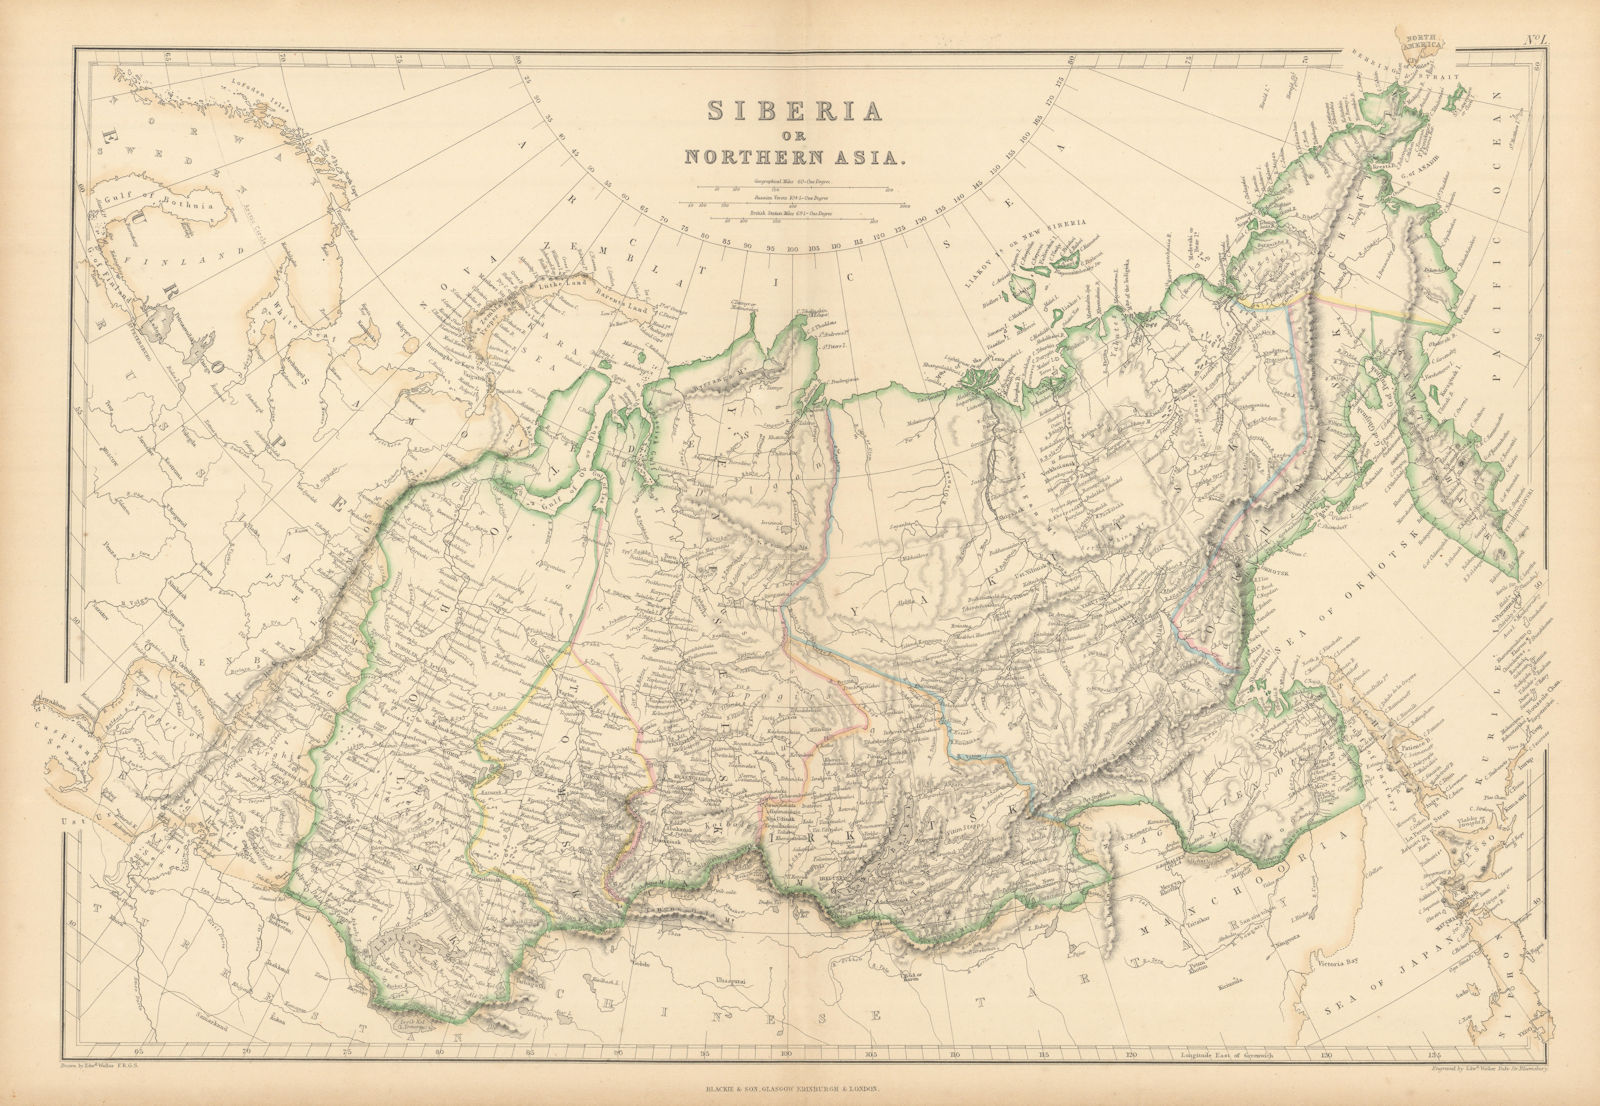 Associate Product Siberia, or Northern Asia by Edward Weller. Russia in Asia 1859 old map